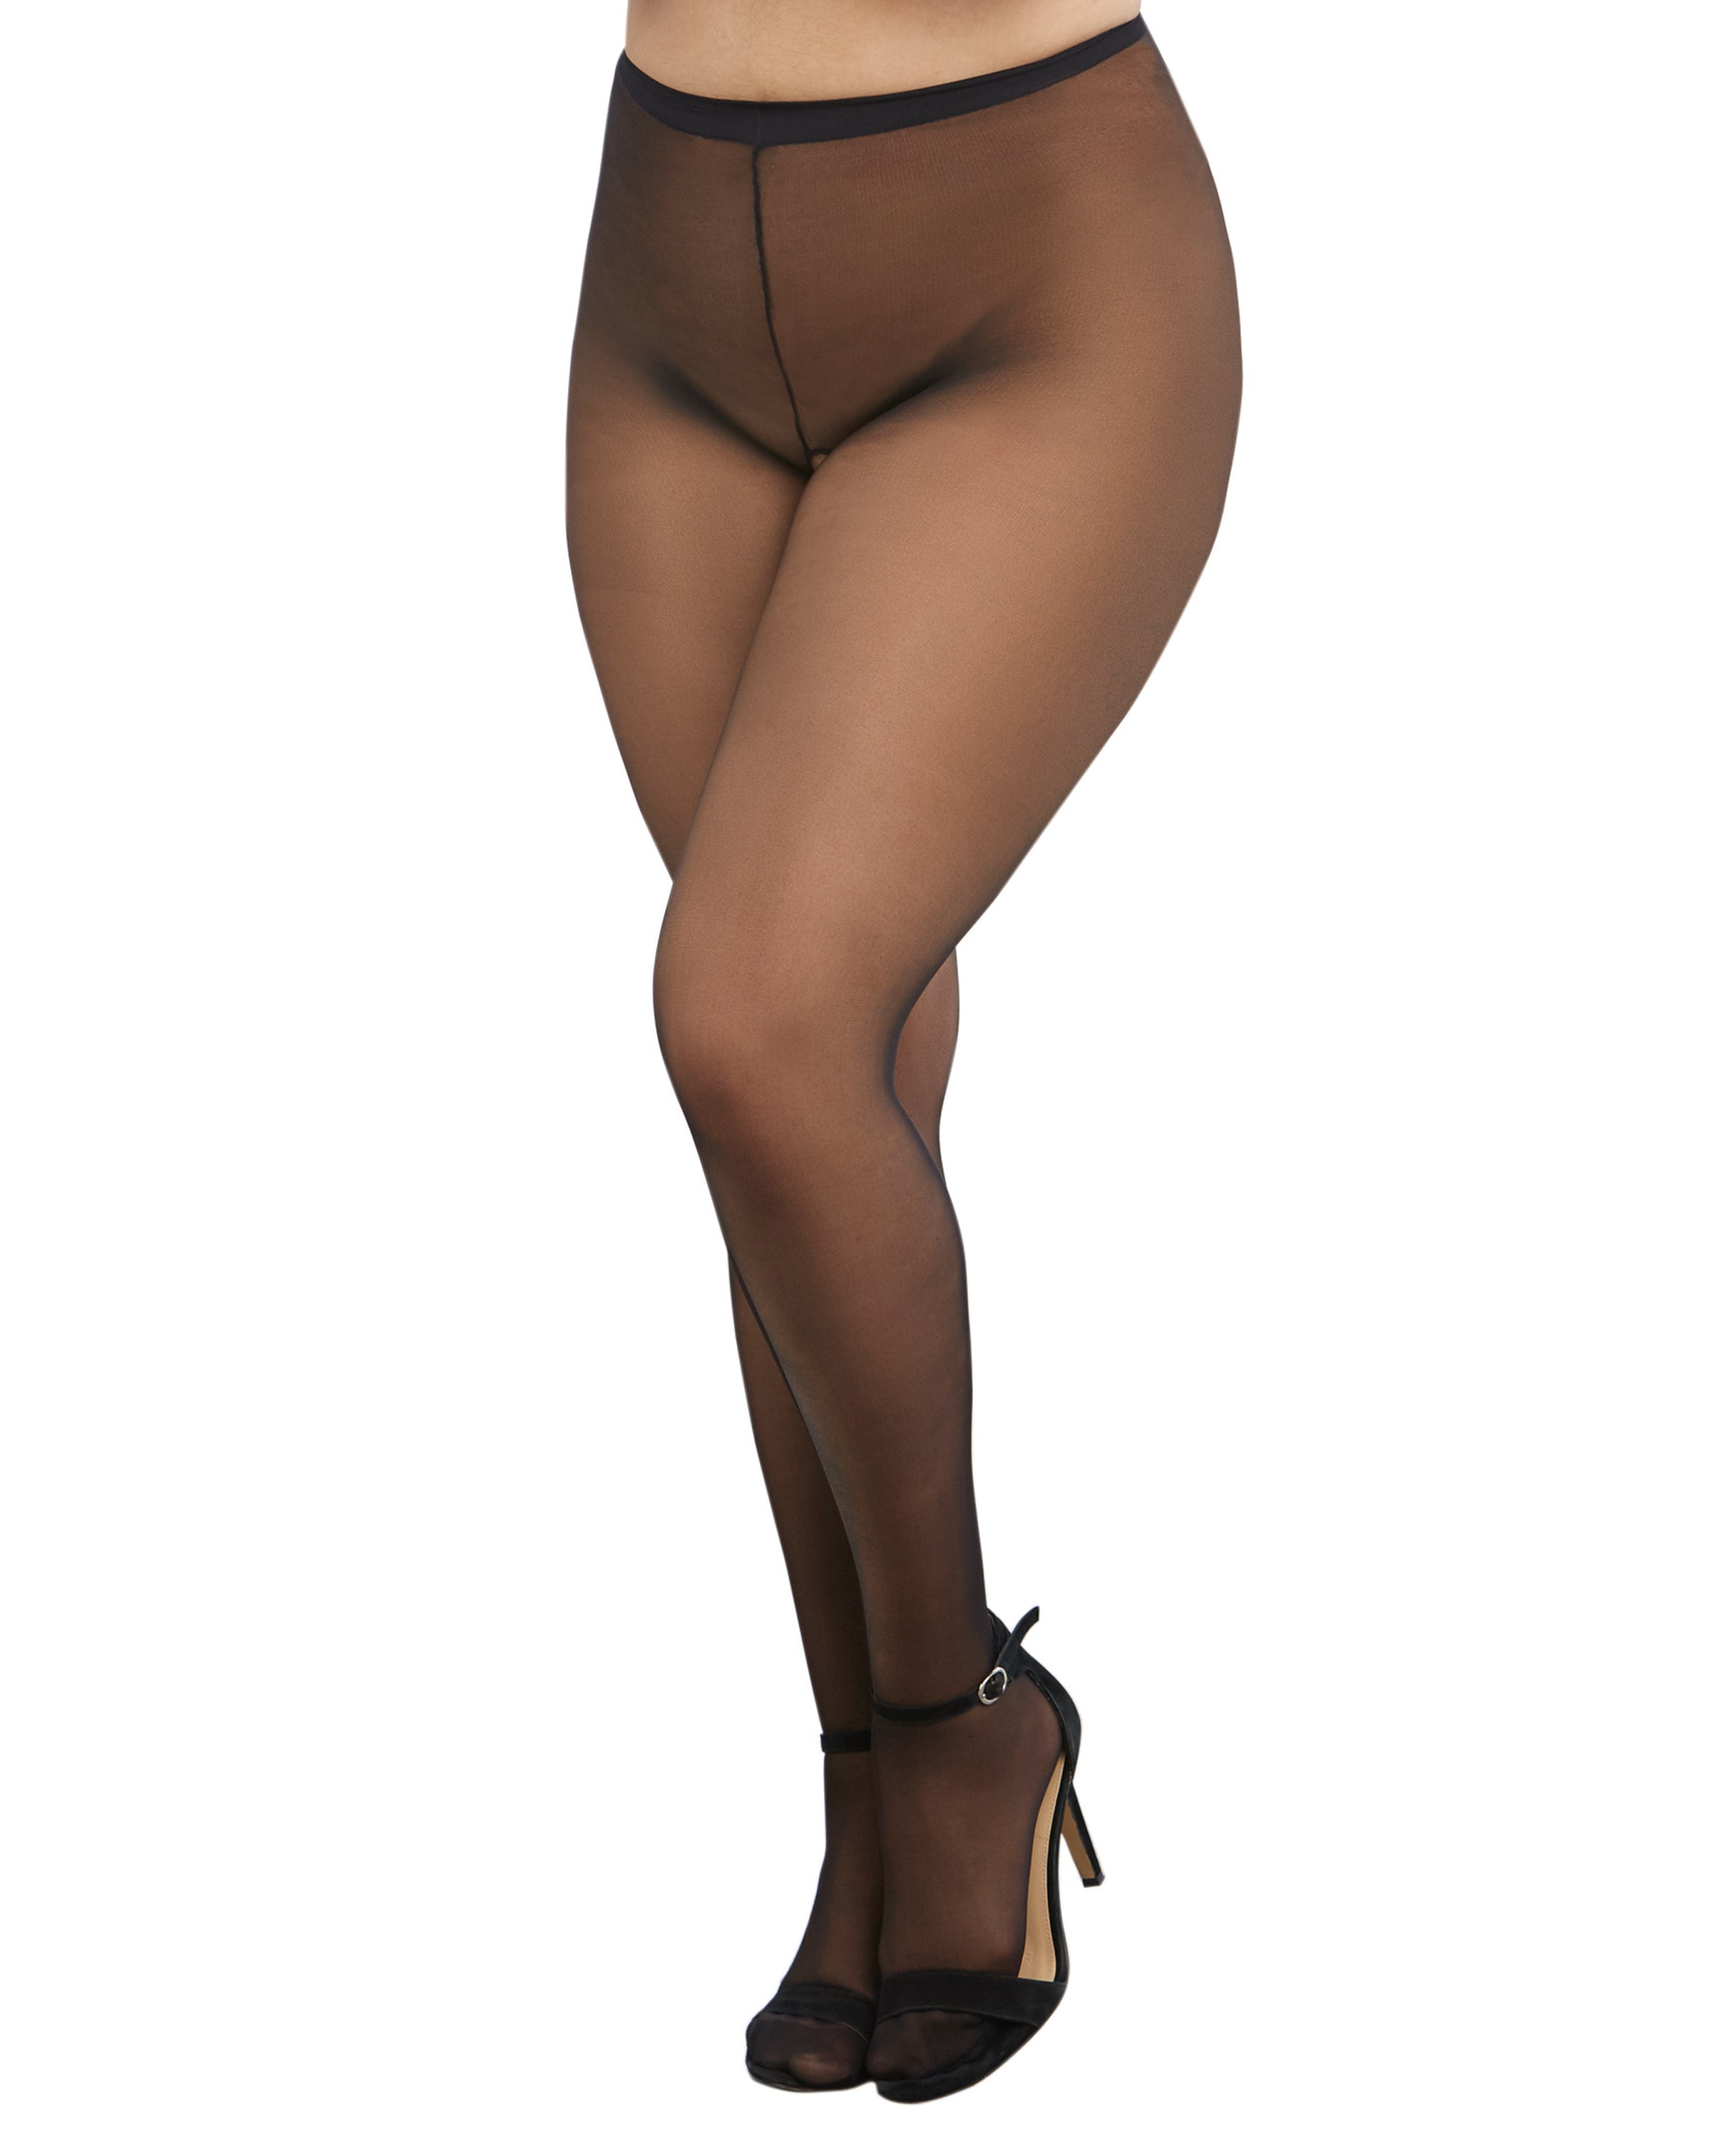 brad wilkins recommends plus size crotchless pantyhose pic